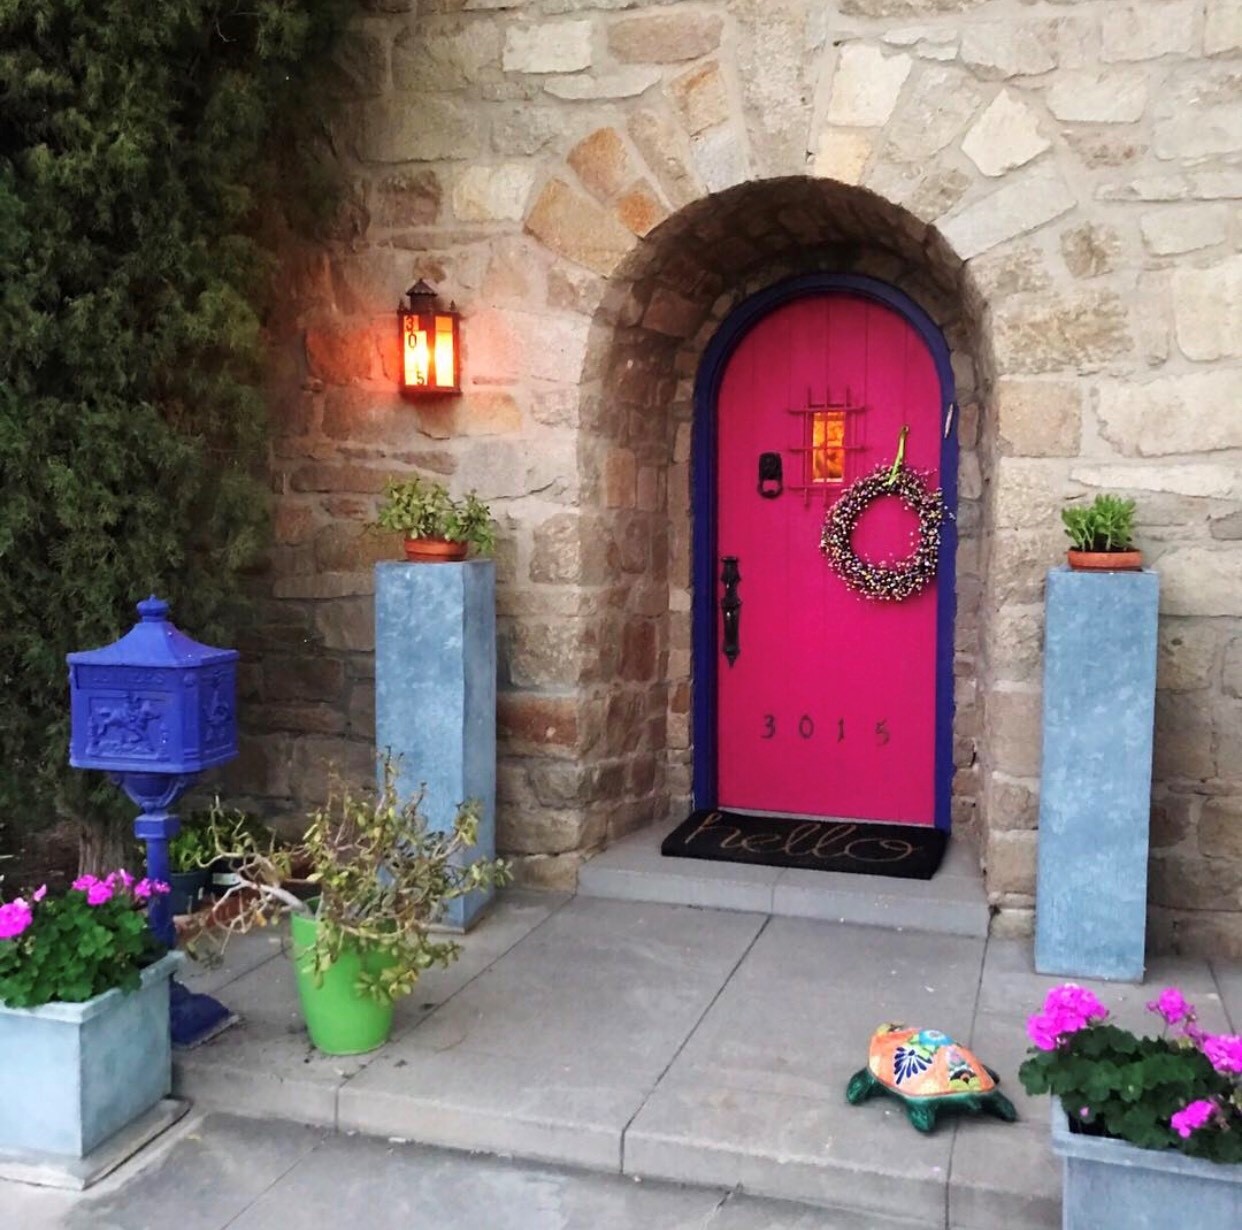 The front door is critically important in Feng Shui, it represents our careers and life journeys. Its called the mouth of the dragon and it’s the entry point to all the energy that flows into our space. Paint your door a color you love, I like pink representing the fire element. Use jade plants to symbolize wealth and the earth element. I have a black mat and a blue mailbox, both representing the water element. My grey planters represent the metal element and my front door is wood, representing the wood element. I have a greeter, a turtle, to welcome the energy and guests, and it is facing towards the door, the way the energy flows.  And finally if you are looking for a new love, a fresh start, or a successful career, then leave your light on, lighting the way for opportunities of all kinds. Spring is a lovely reminder of how beautiful change can be. Happy Spring!